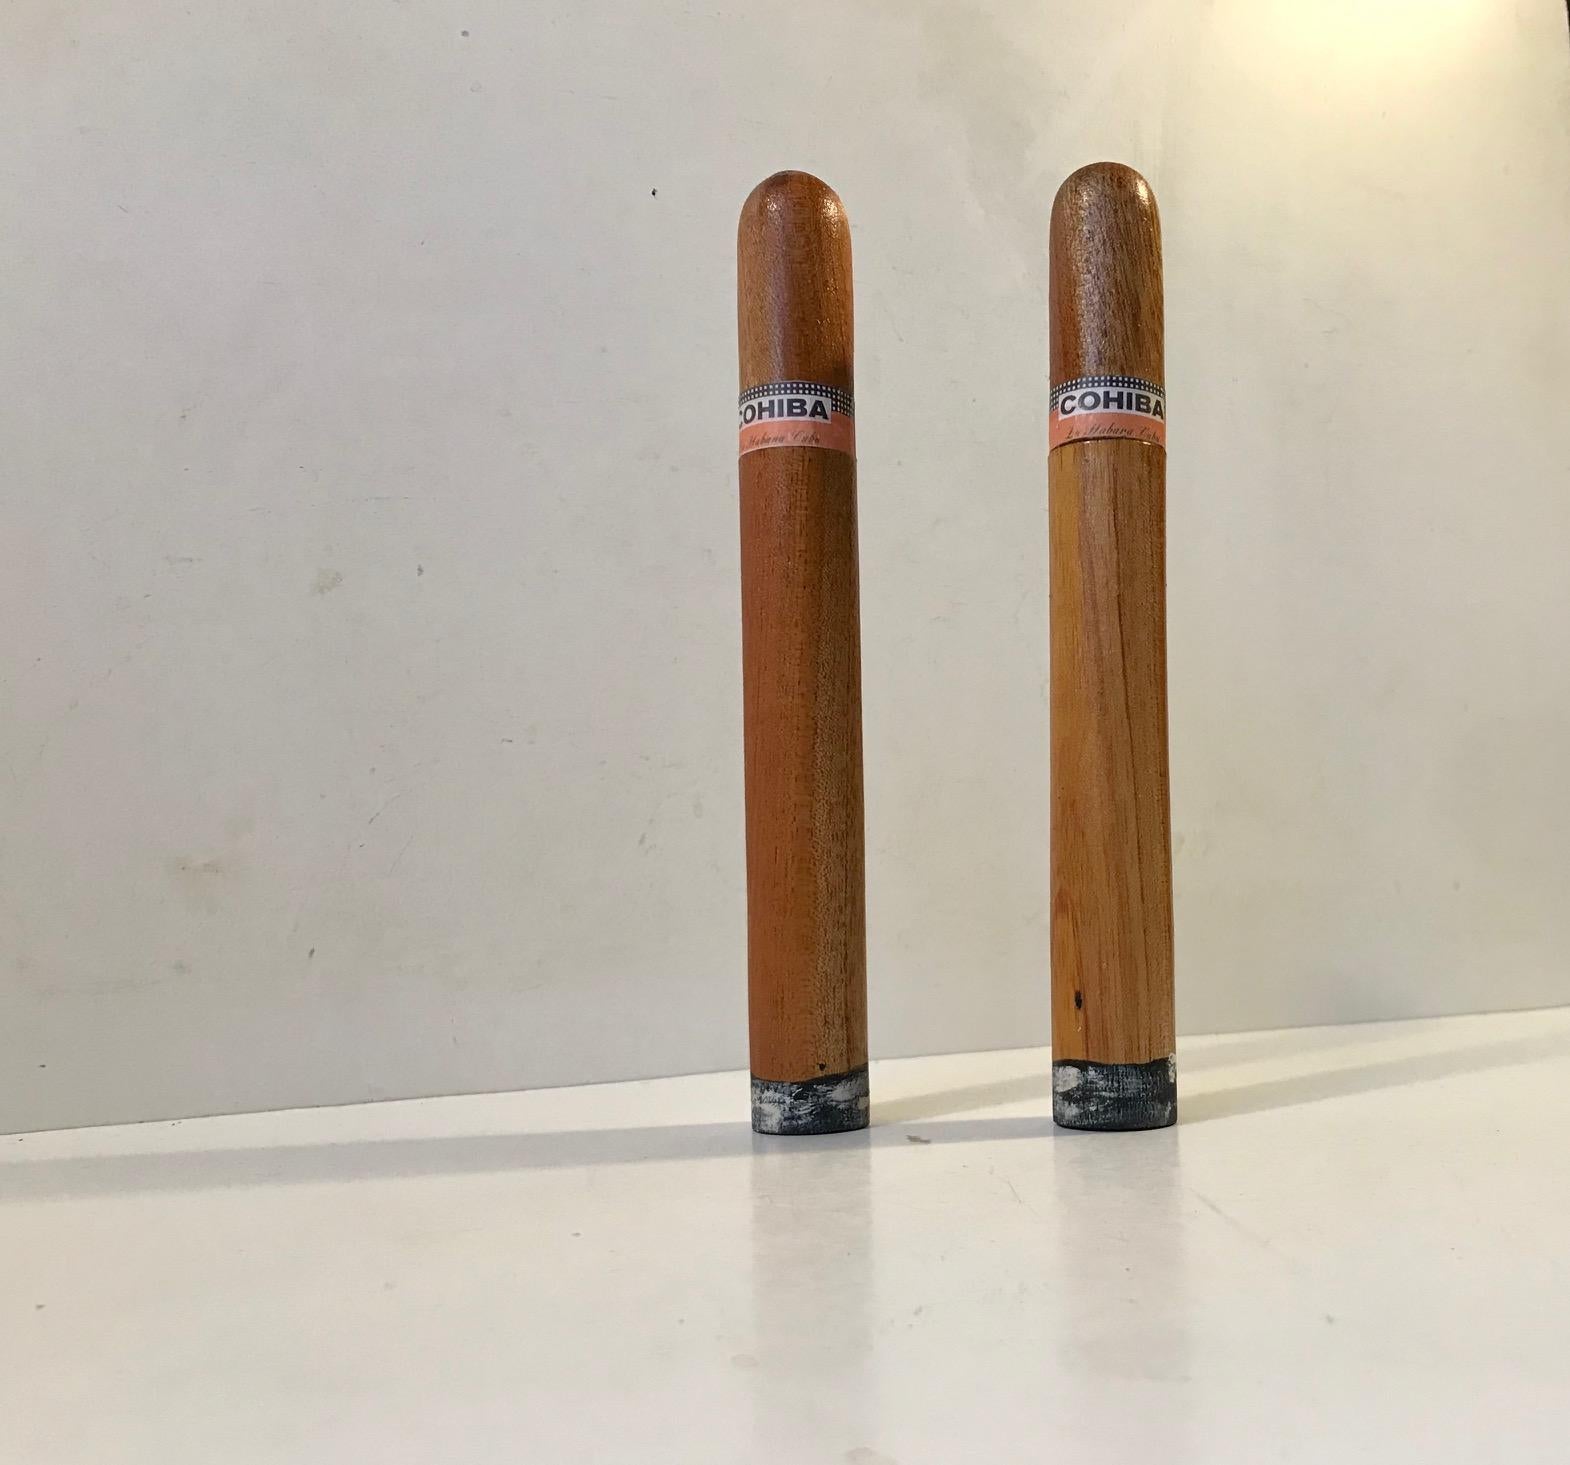 A set of vintage cigar tubes from Cohiba. They are made from teak and dates to the 1960s. They still contain Cohiba cigars one of which is missing 1 inch of the outer leaves. These cigars will be gifted along with the tubes.